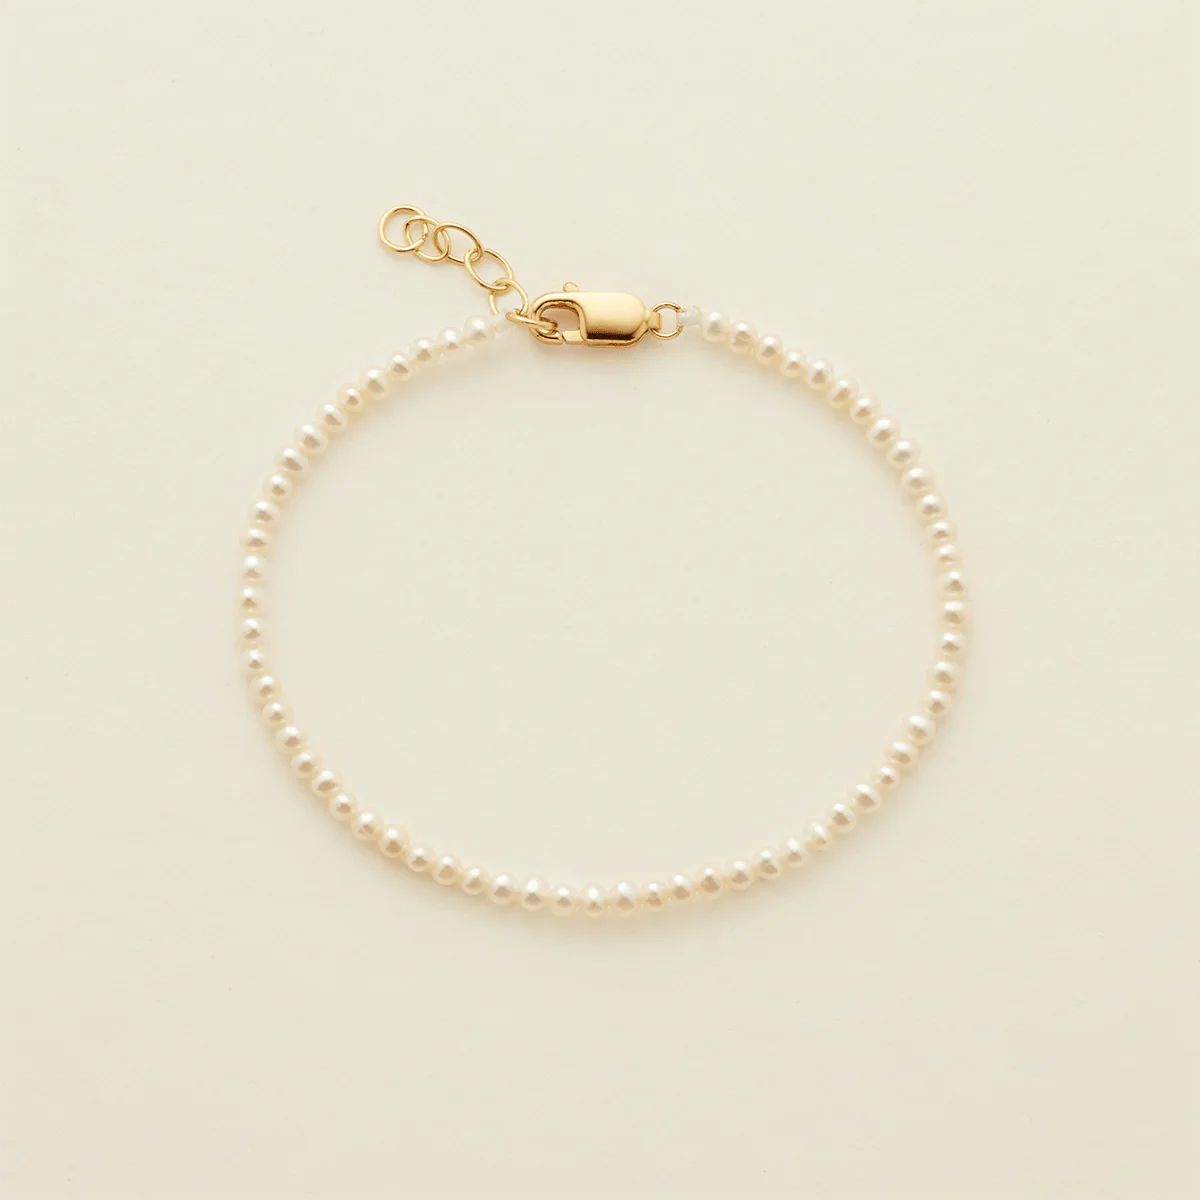 Pearl Strand Bracelet | Made by Mary (US)